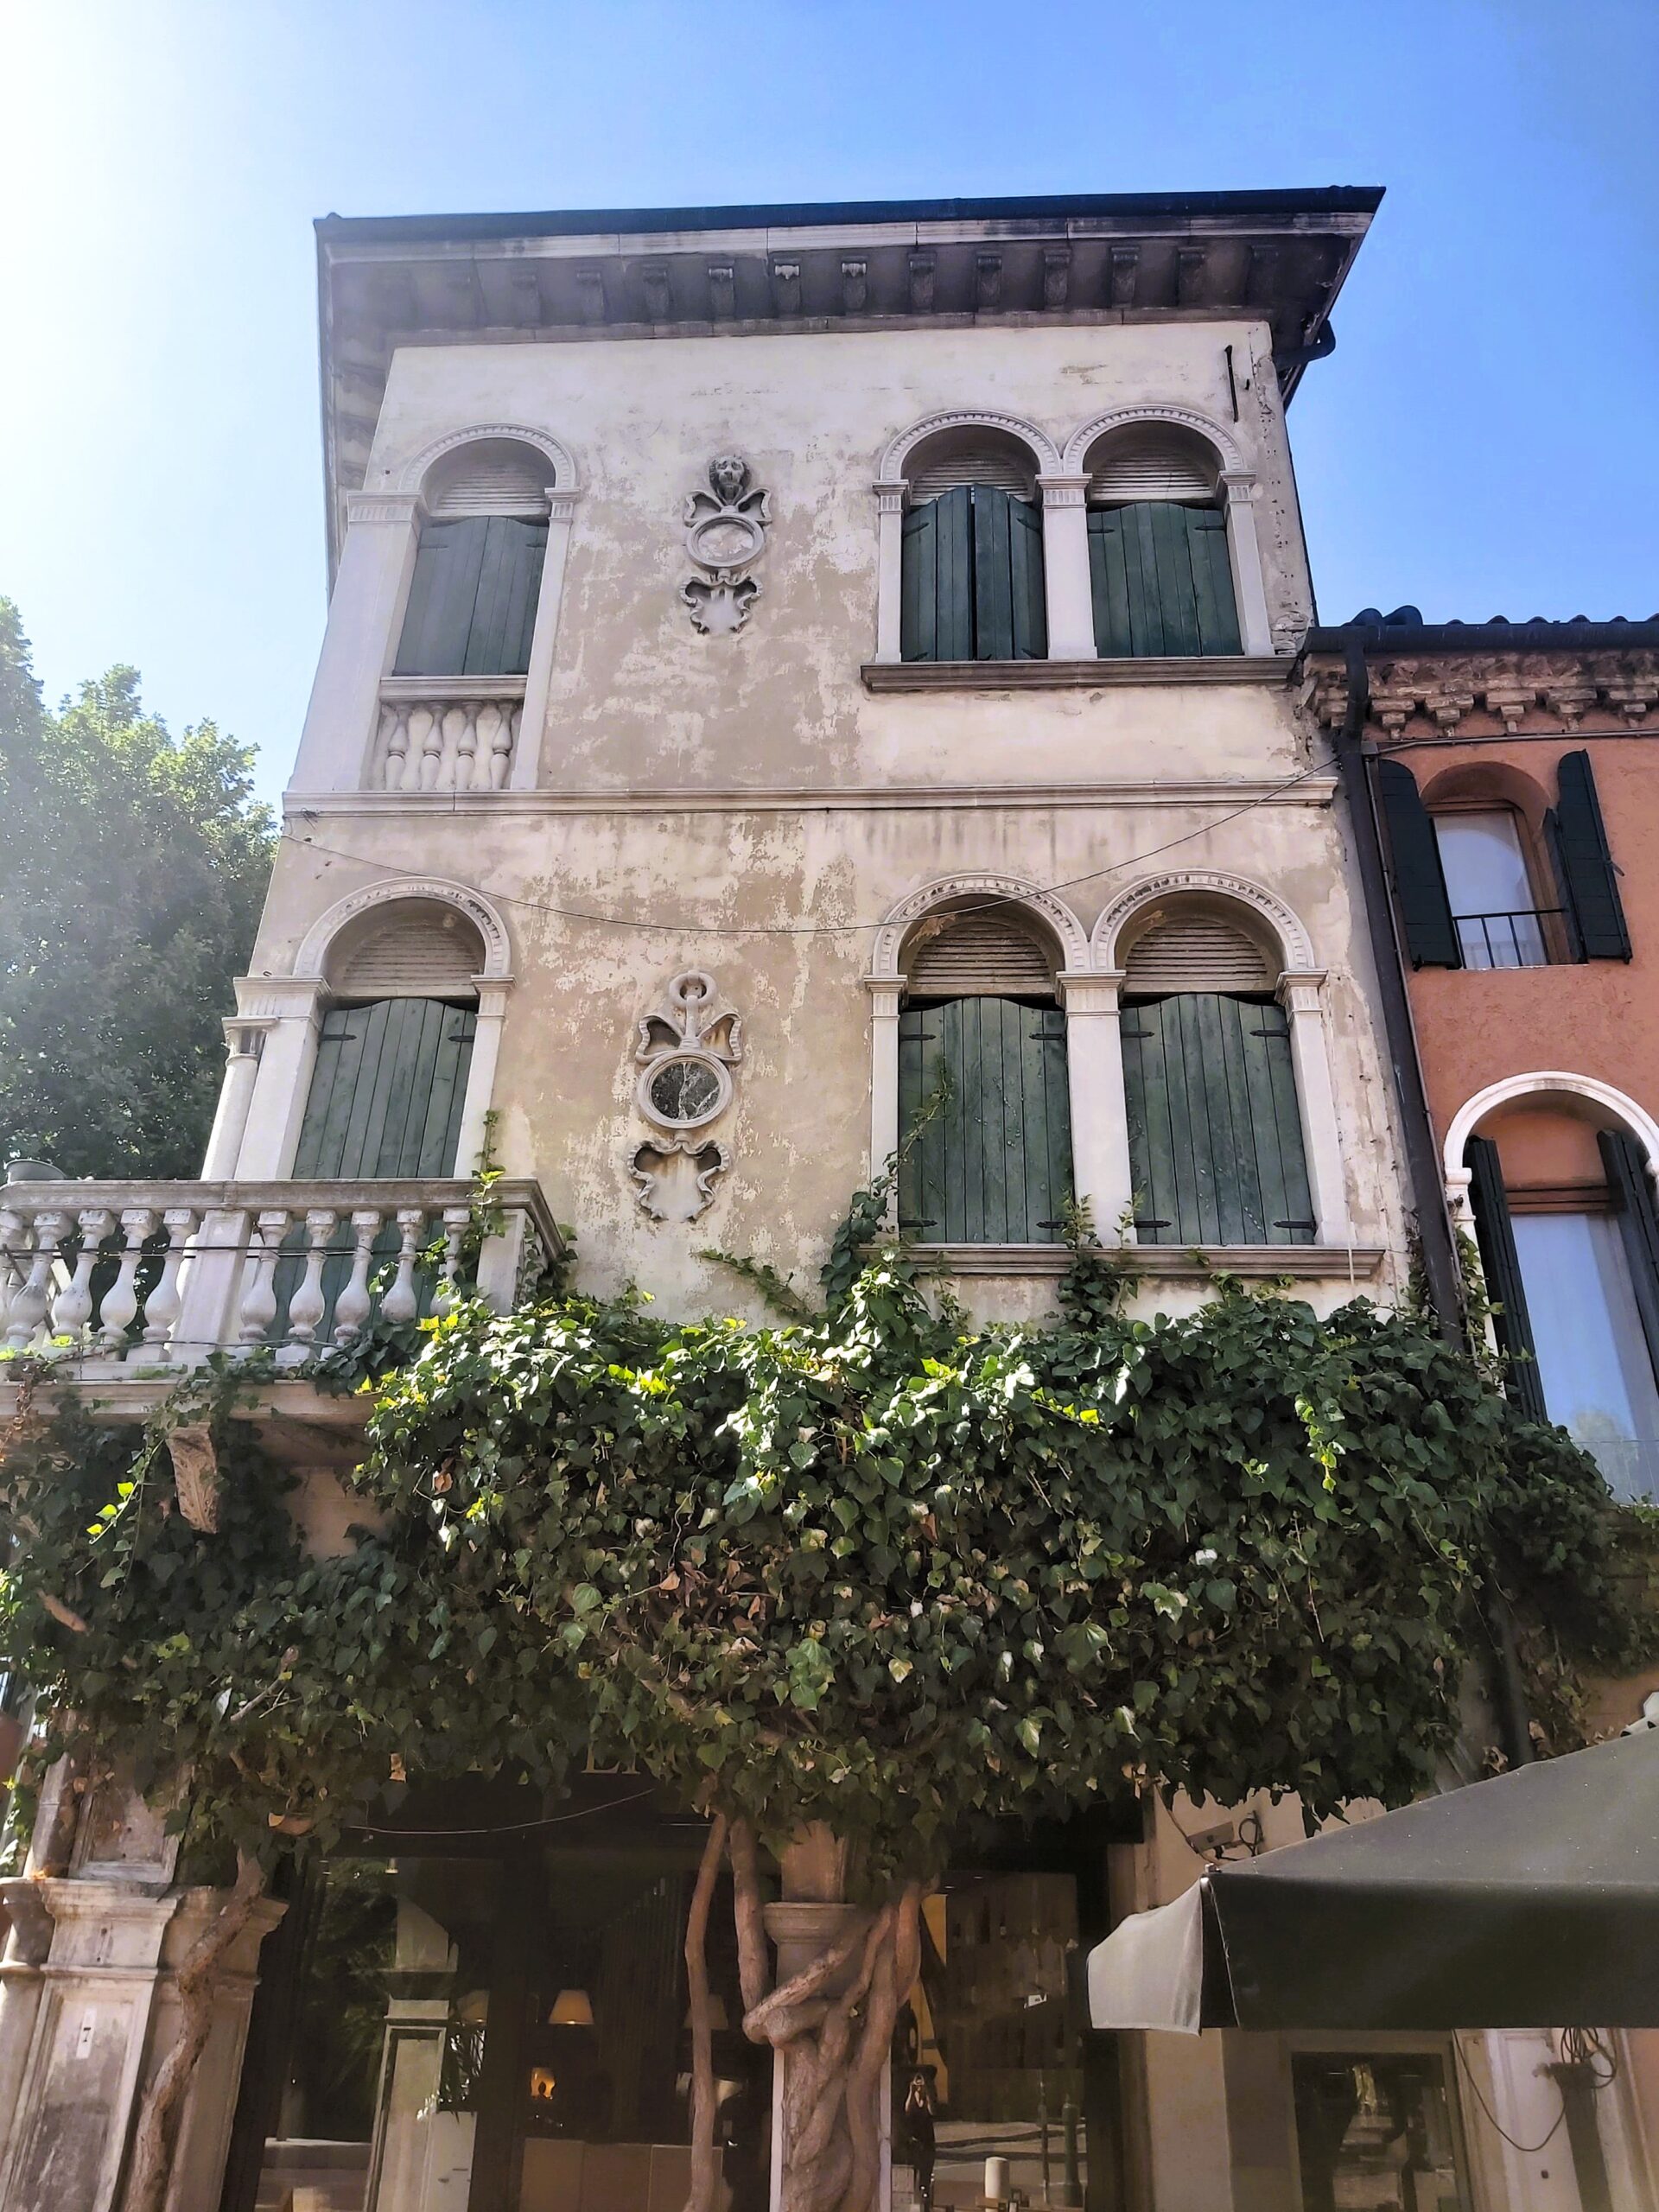 An old building with green shutters and arched windows. A pretty scene with foliage in Mestre, Italy